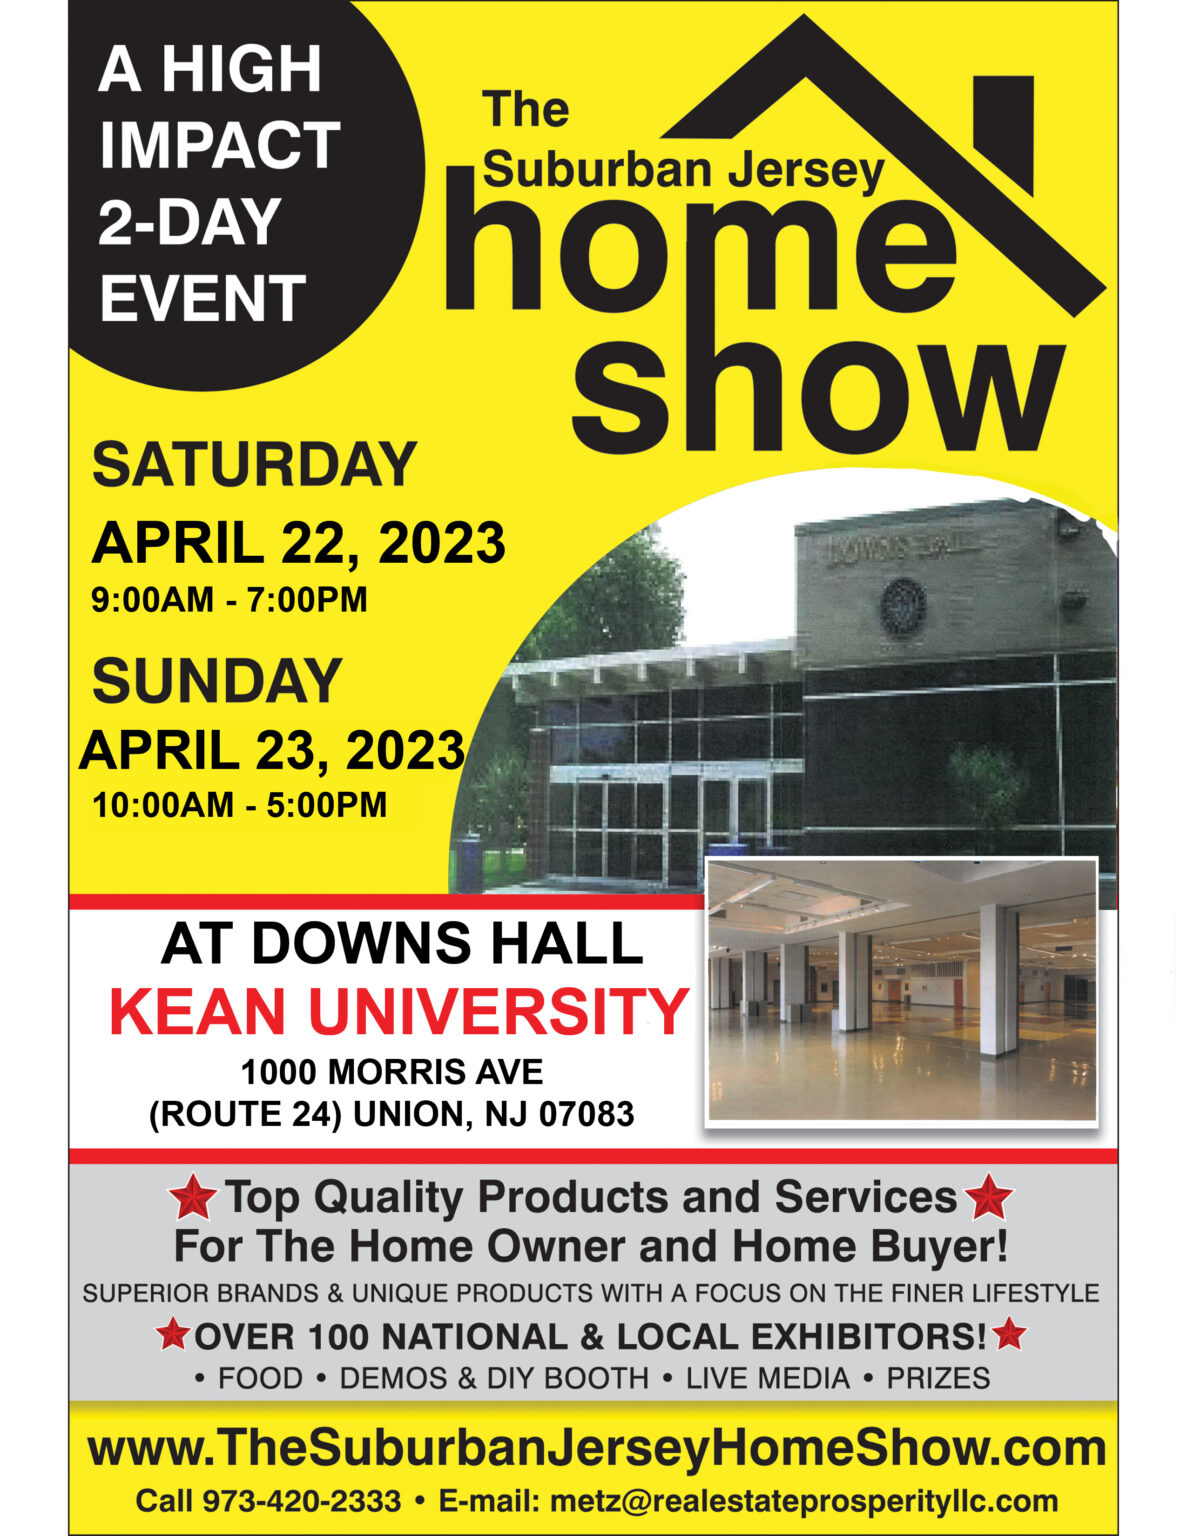 The Suburban Jersey Home Show